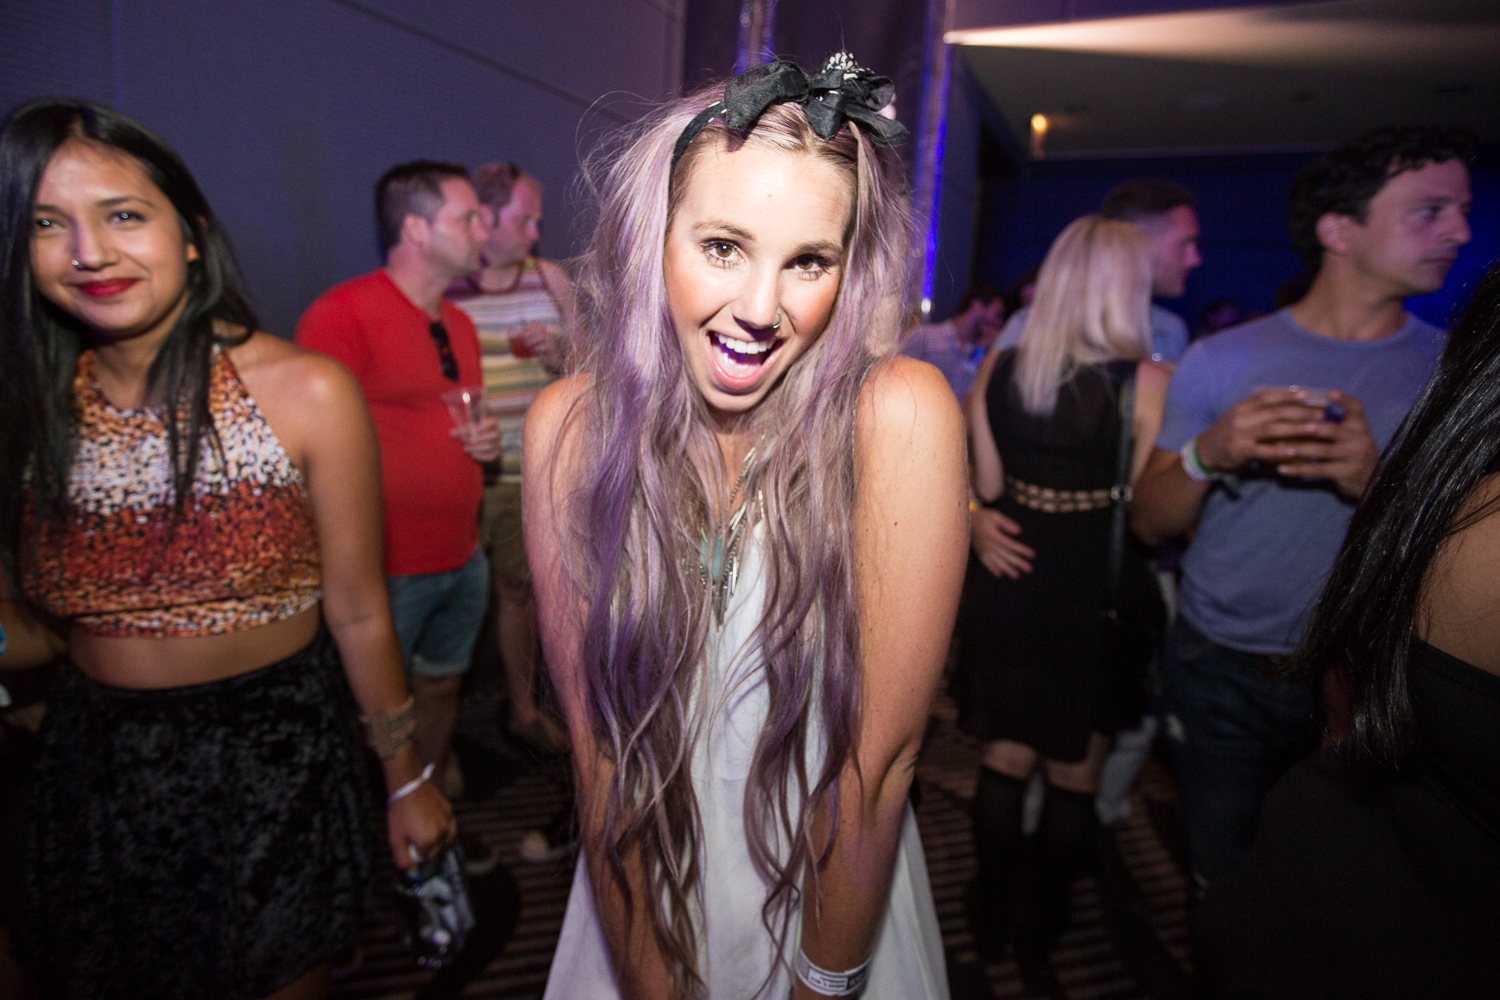 ASOS Rocks Lollapalooza VIP After Party at the Hard Rock Hotel in Chicago on August 3, 2013